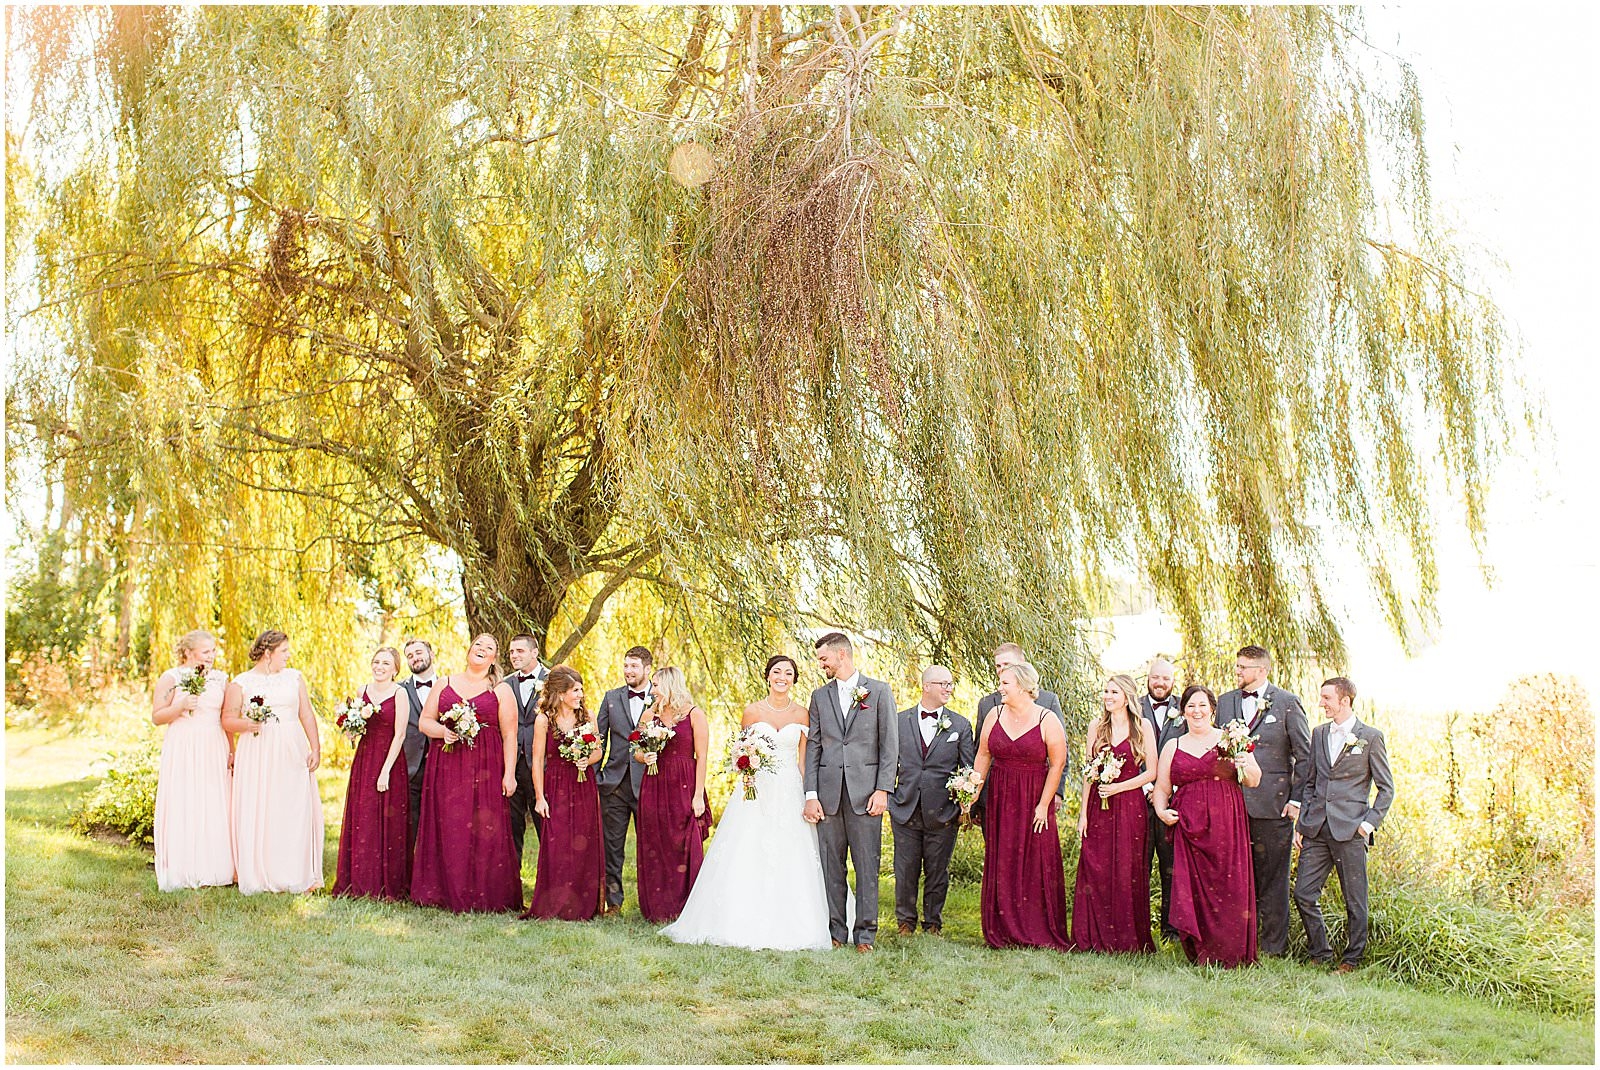 A Stunning Fall Wedding in Indianapolis, IN |. Sally and Andrew | Bret and Brandie Photography 0099.jpg